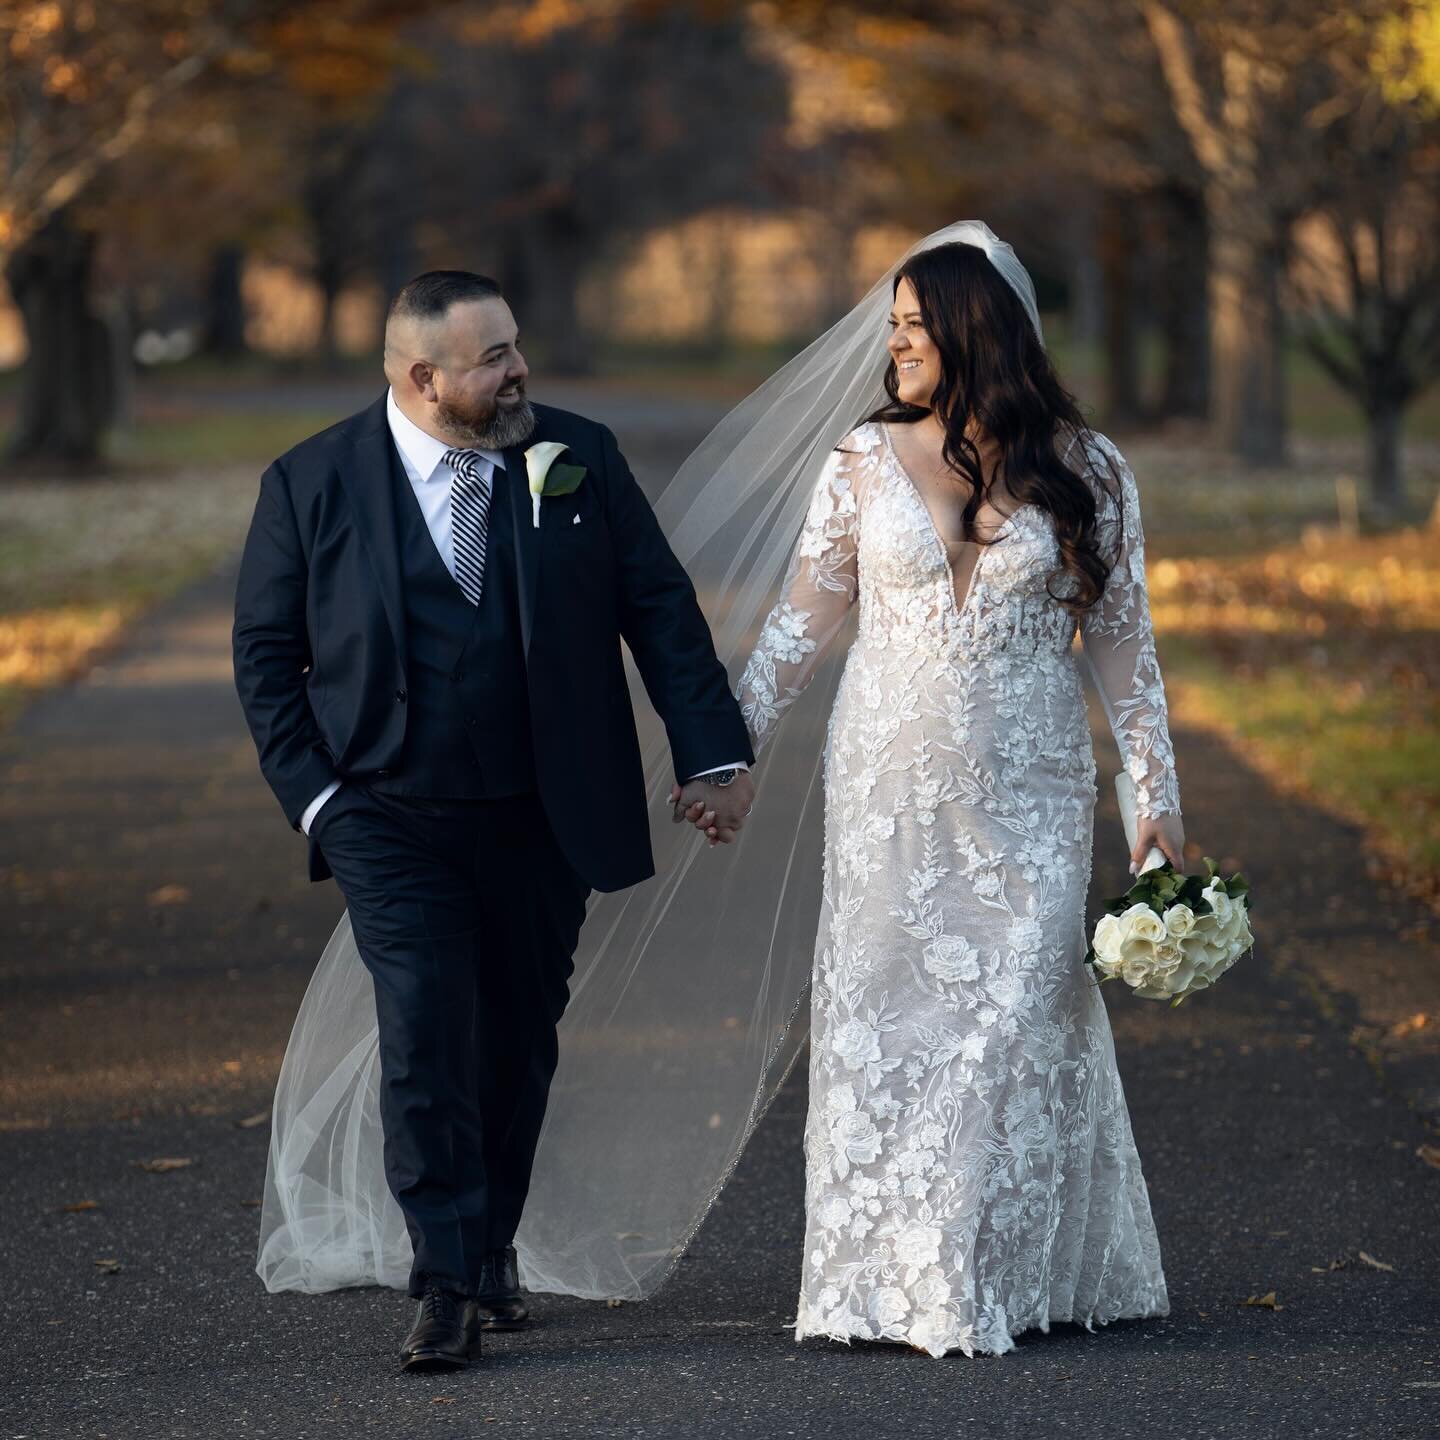 ✨SUNDAY SPOTLIGHT✨

Gorgeous bride babe Ariana was all smiles on her big day (and can we talk about how sweet her smile is?!? 🥺)

Ariana fully customized her @zavanabridal gown from the fabric appliqu&eacute;, the added detachable sleeves, train len